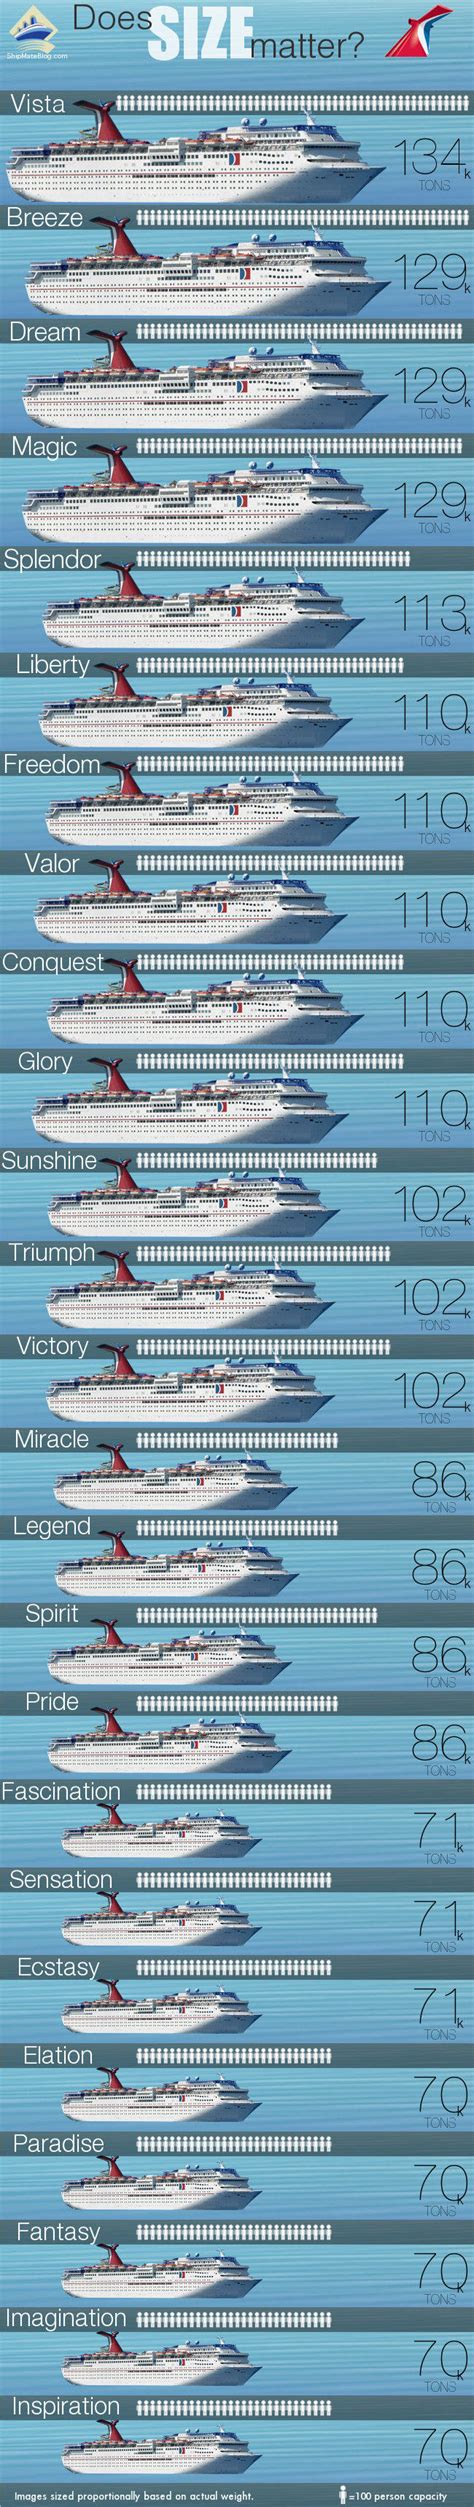 Carnival Ships By Size